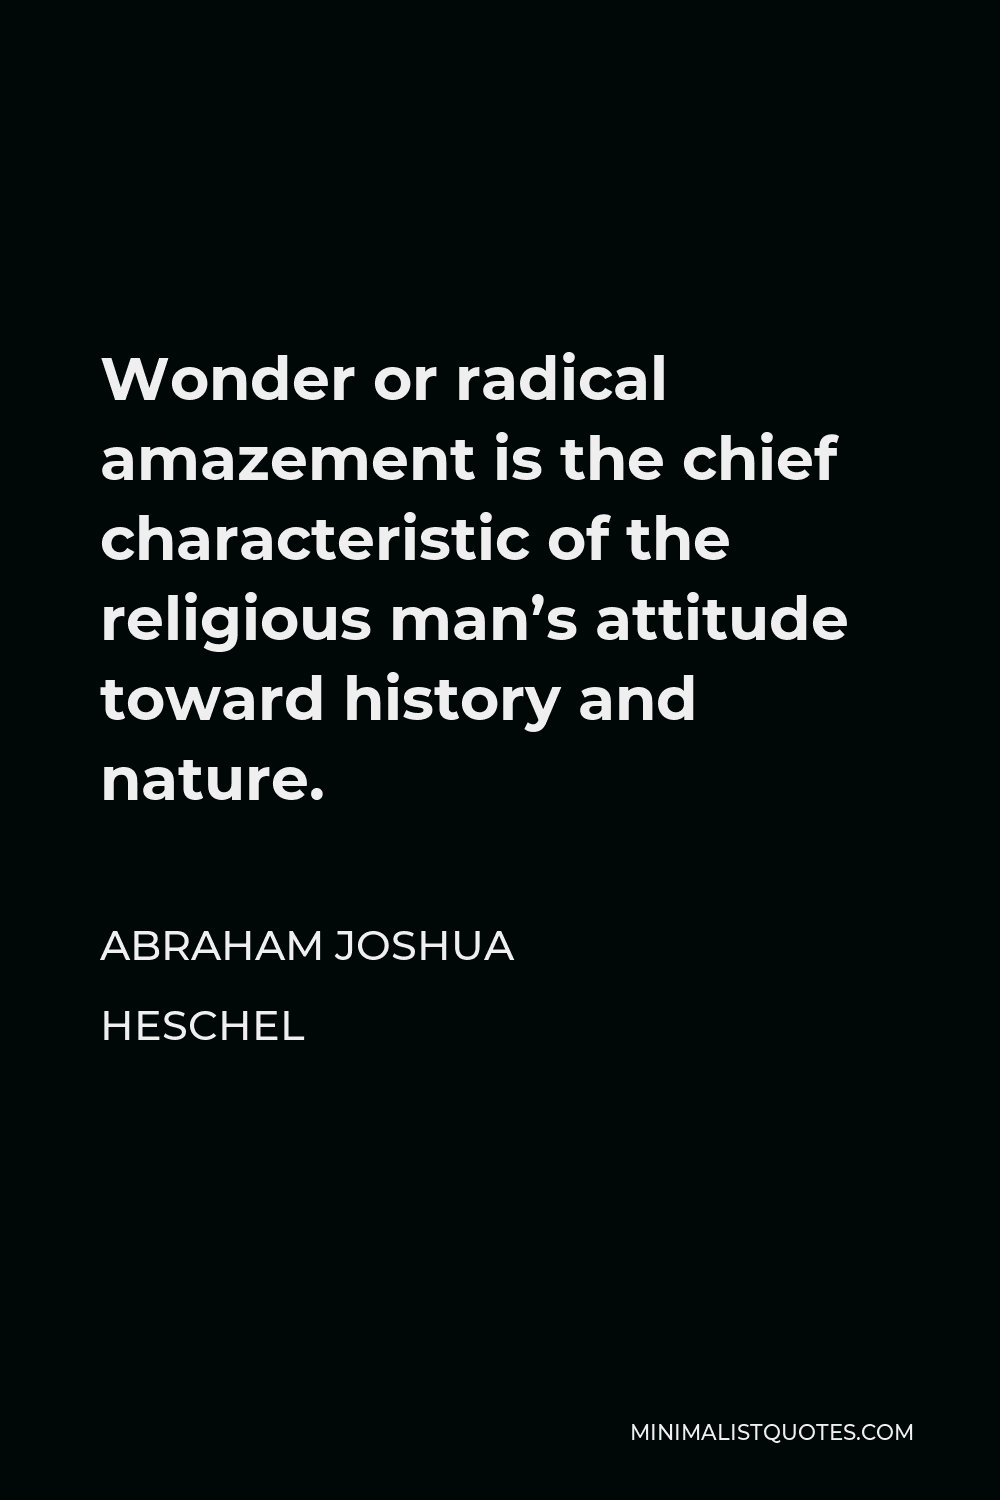 Abraham Joshua Heschel Quote - Wonder or radical amazement is the chief characteristic of the religious man’s attitude toward history and nature.